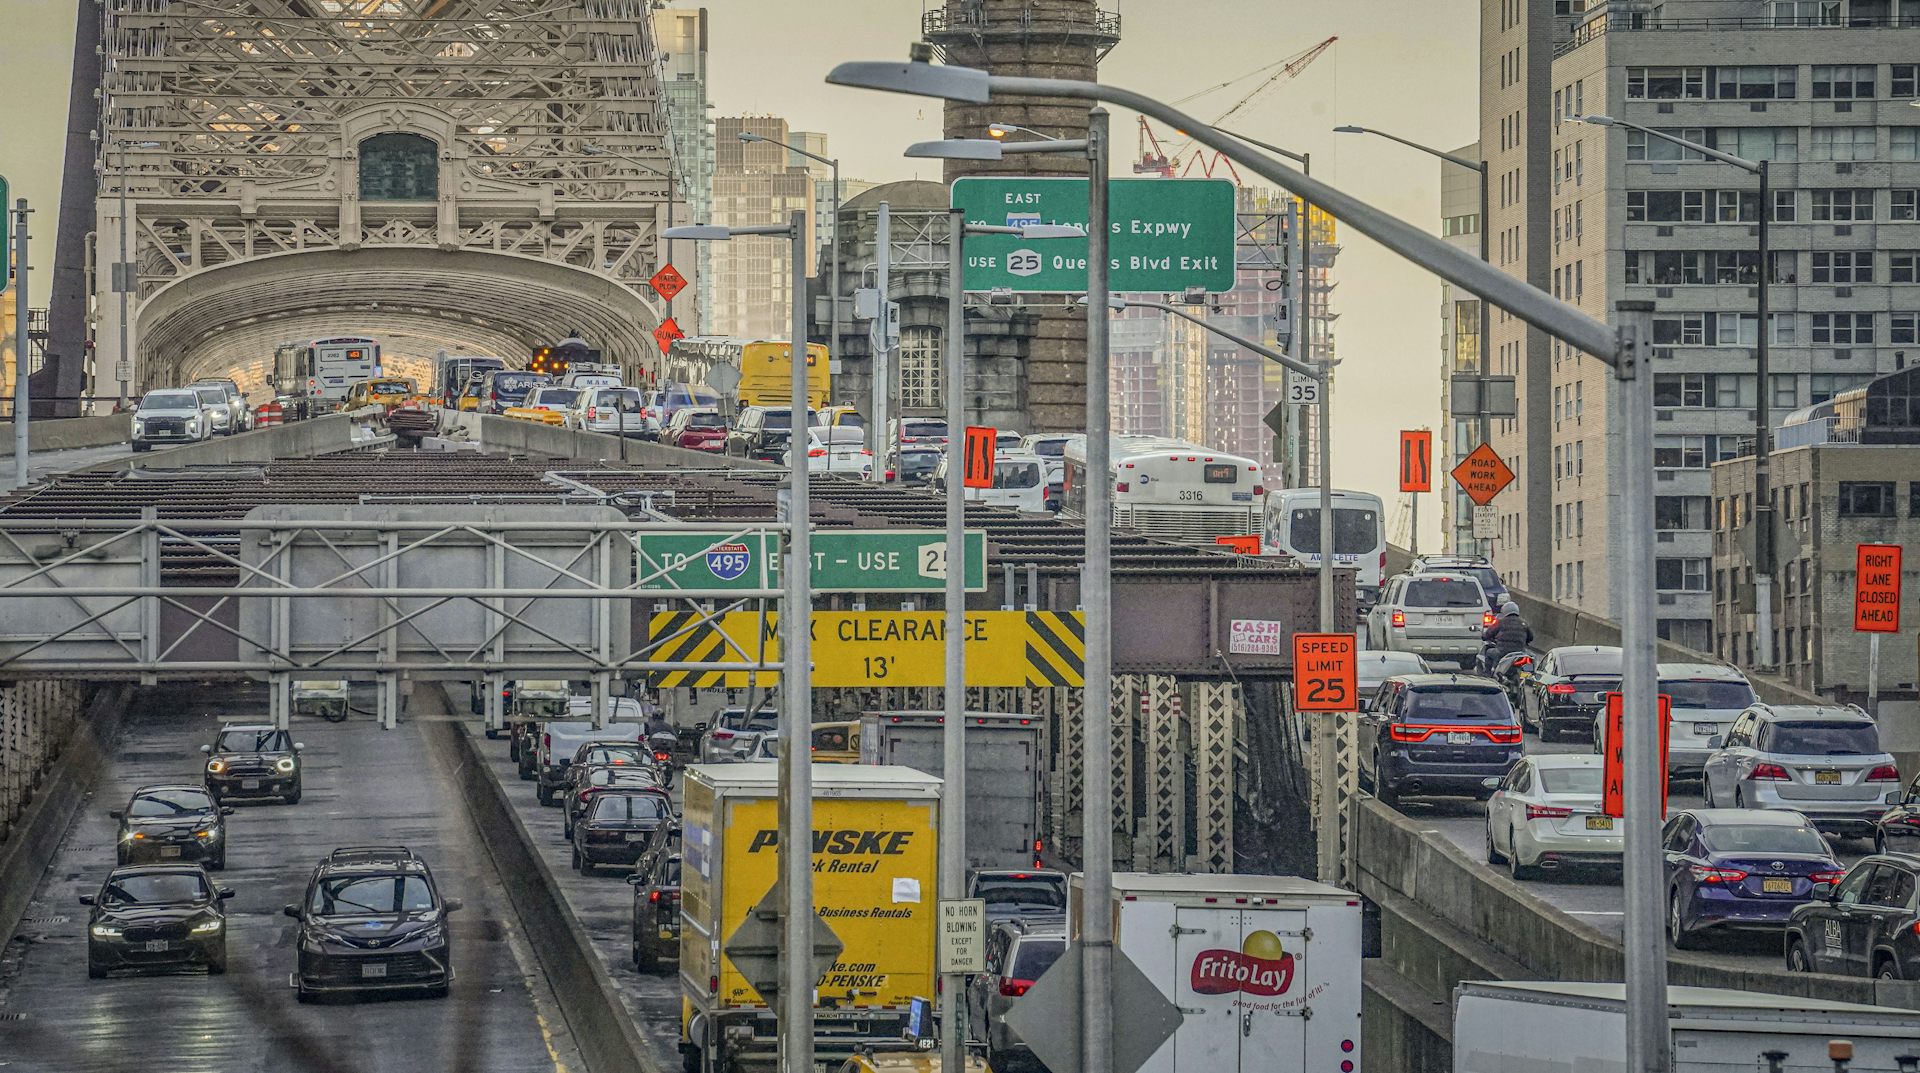 New York City greenlights congestion pricing – here’s how this toll plan is expected to improve traffic, air quality and public transit